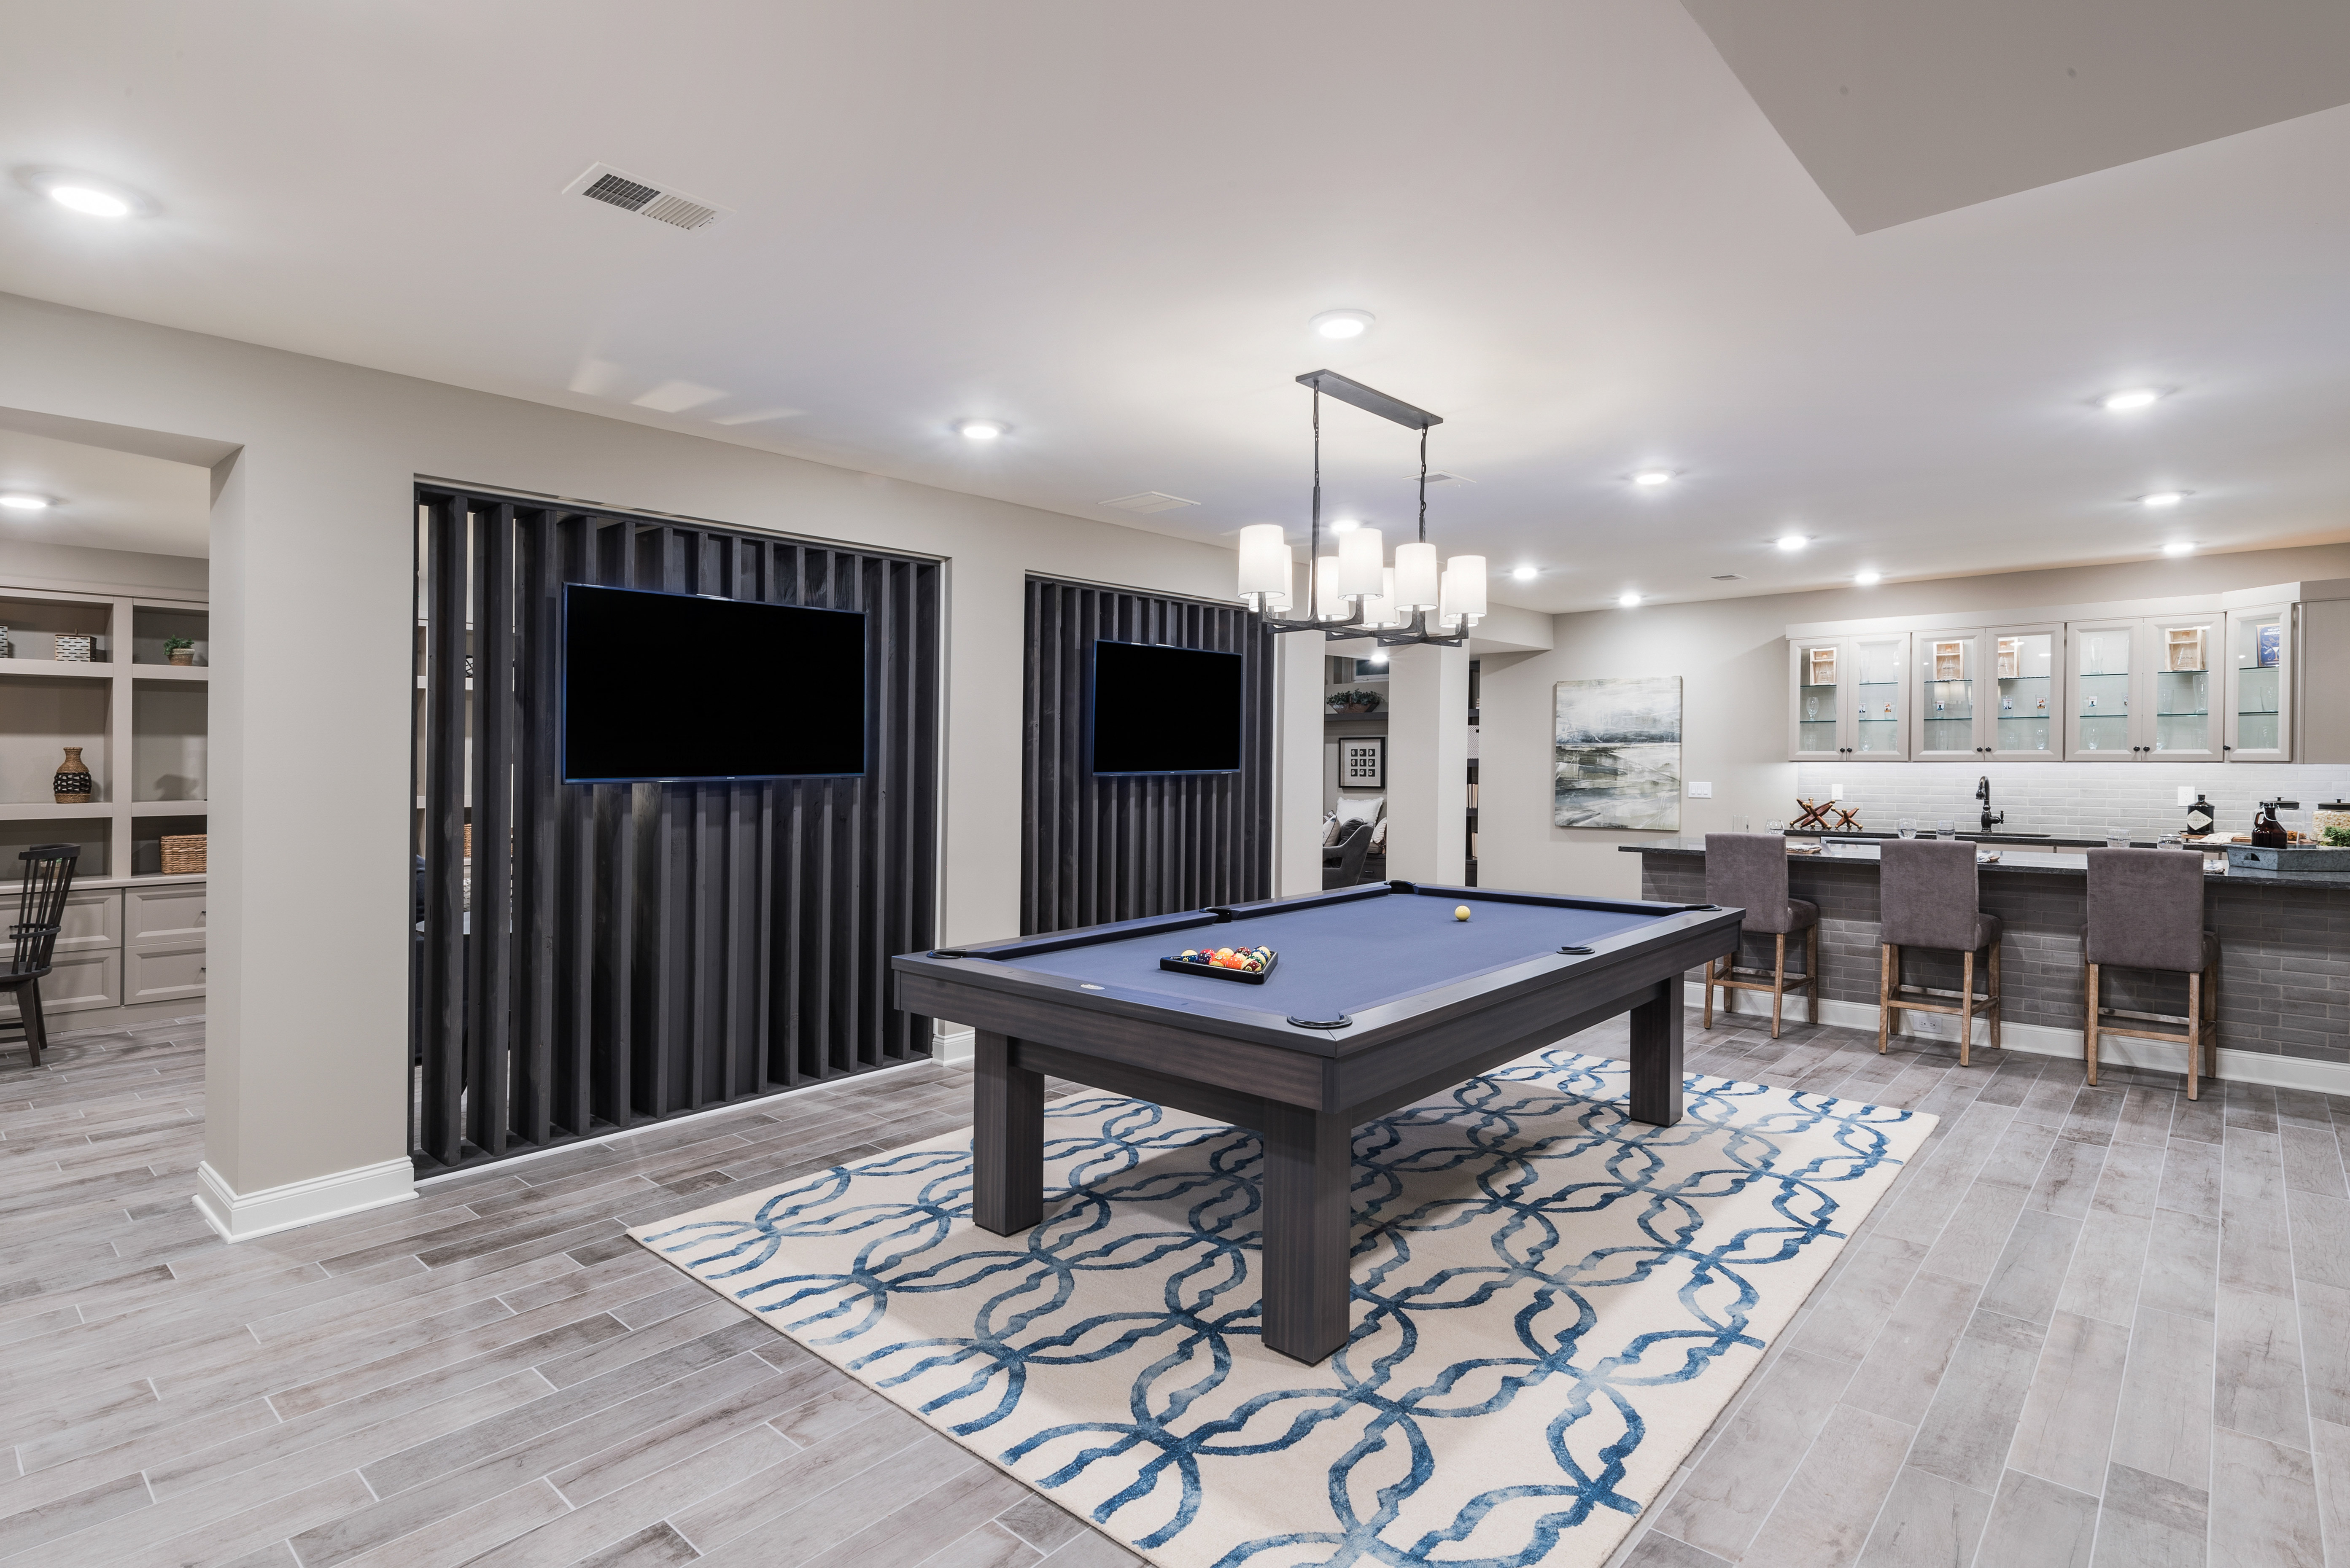 Pool Table and Bar Furnished in a Finished Basement